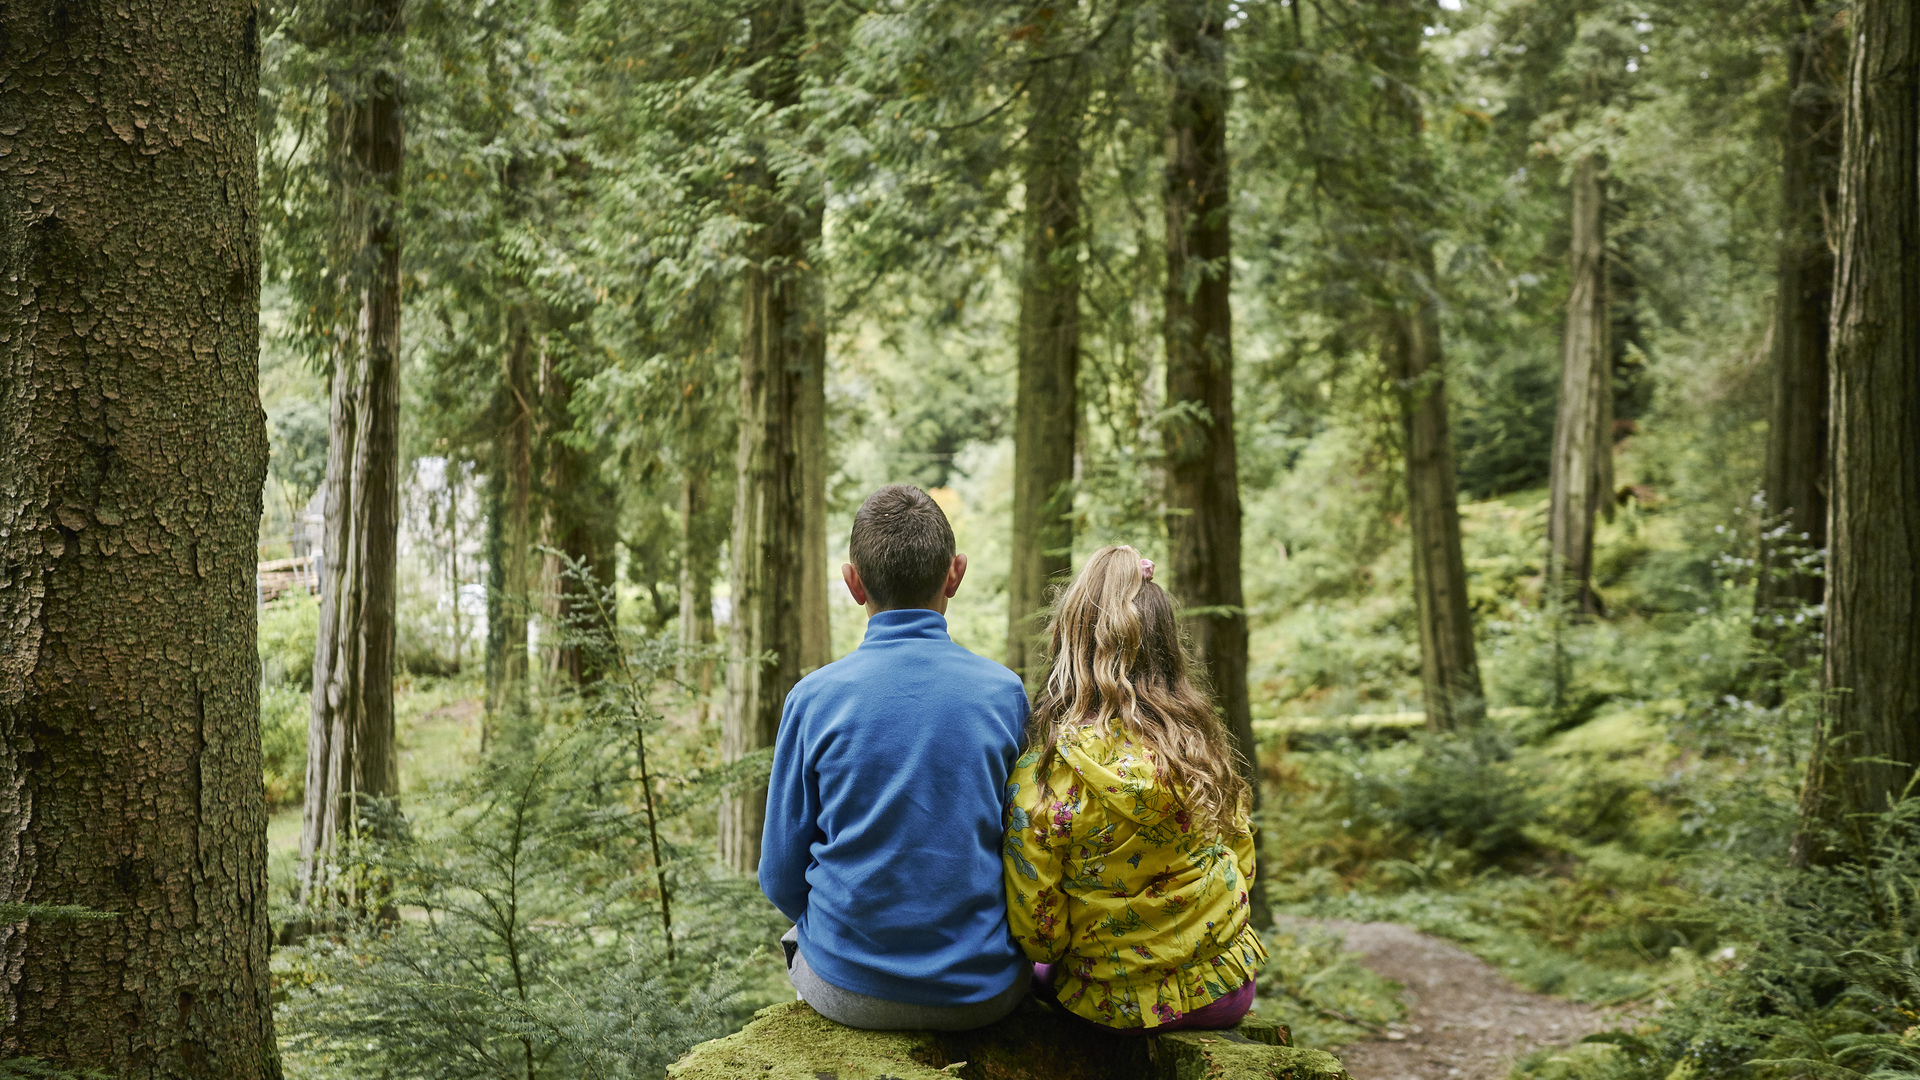 Two children sit together, facing away in a lush forest. 